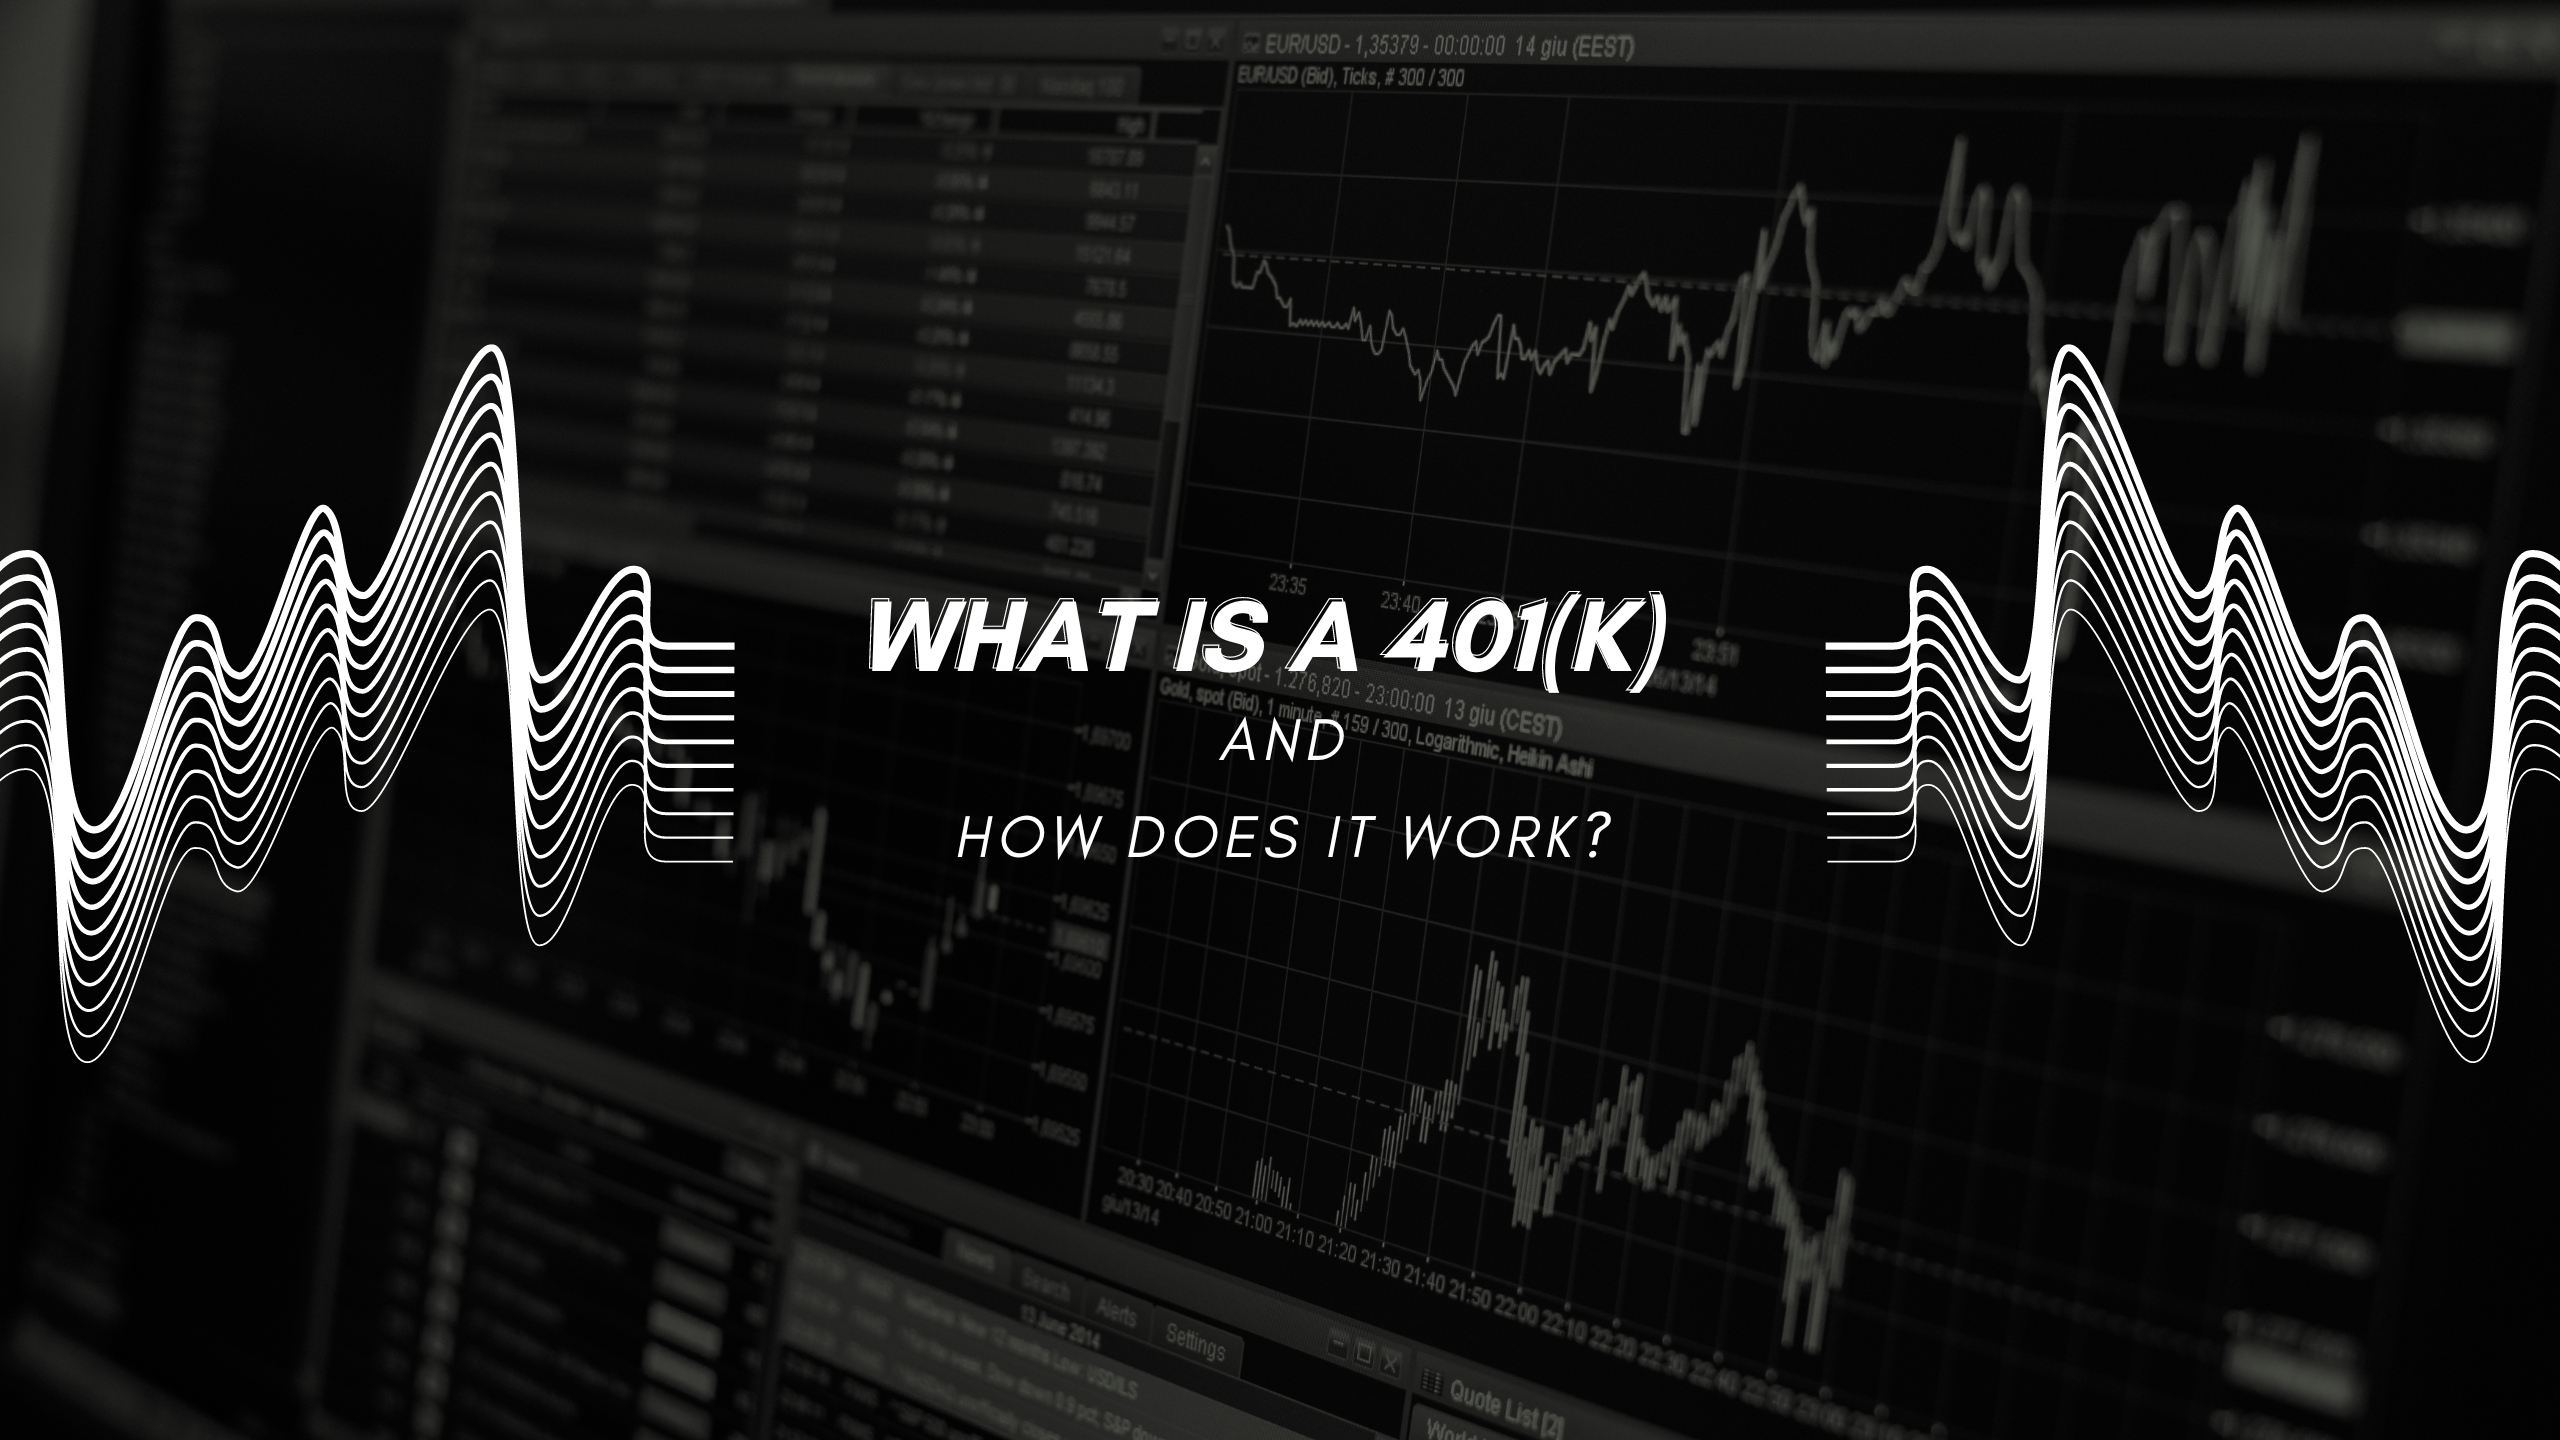 What is a 401(k) and how does it work?